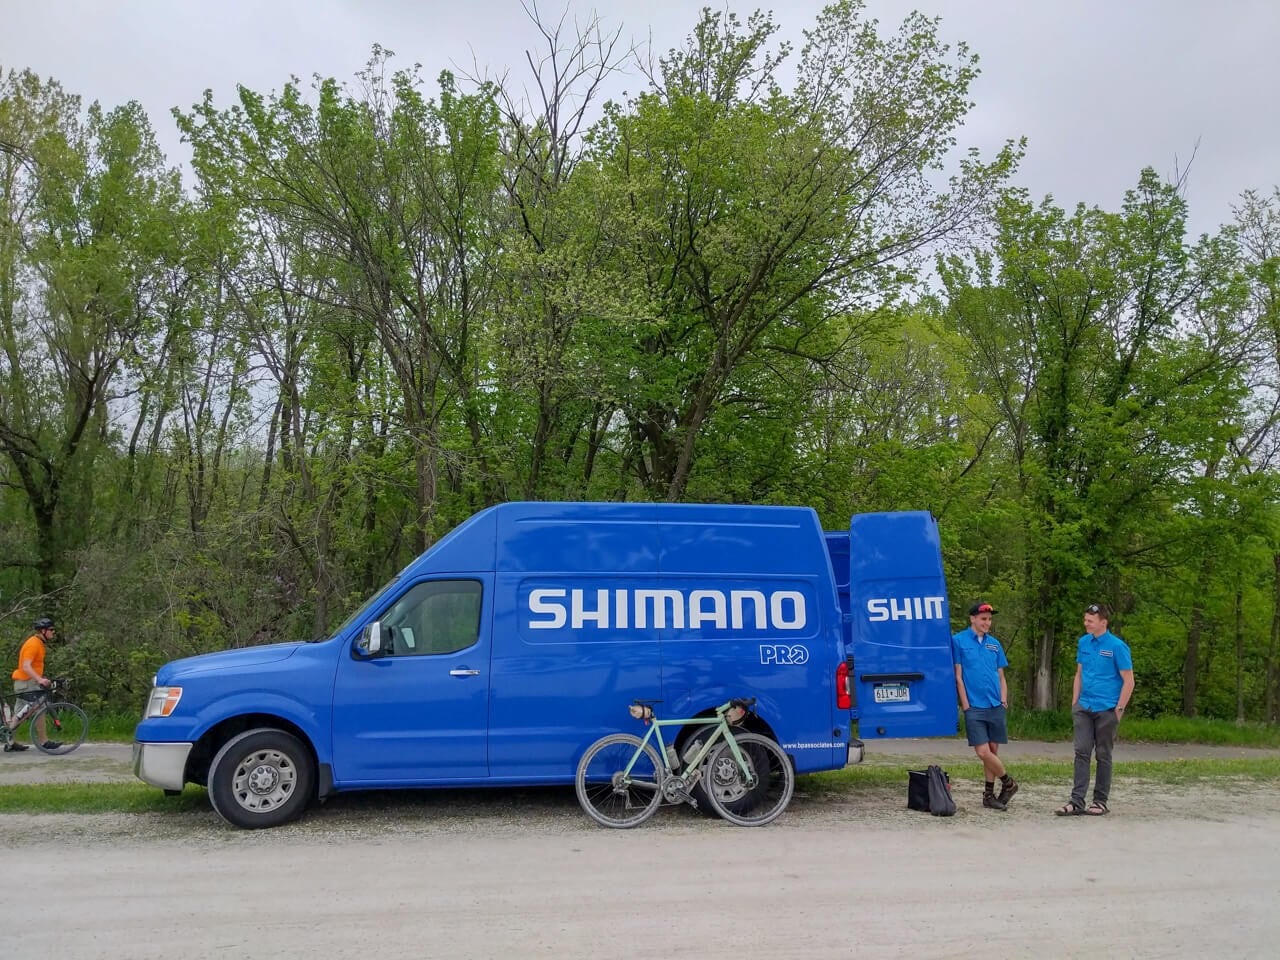 Shimano Support Vehicle